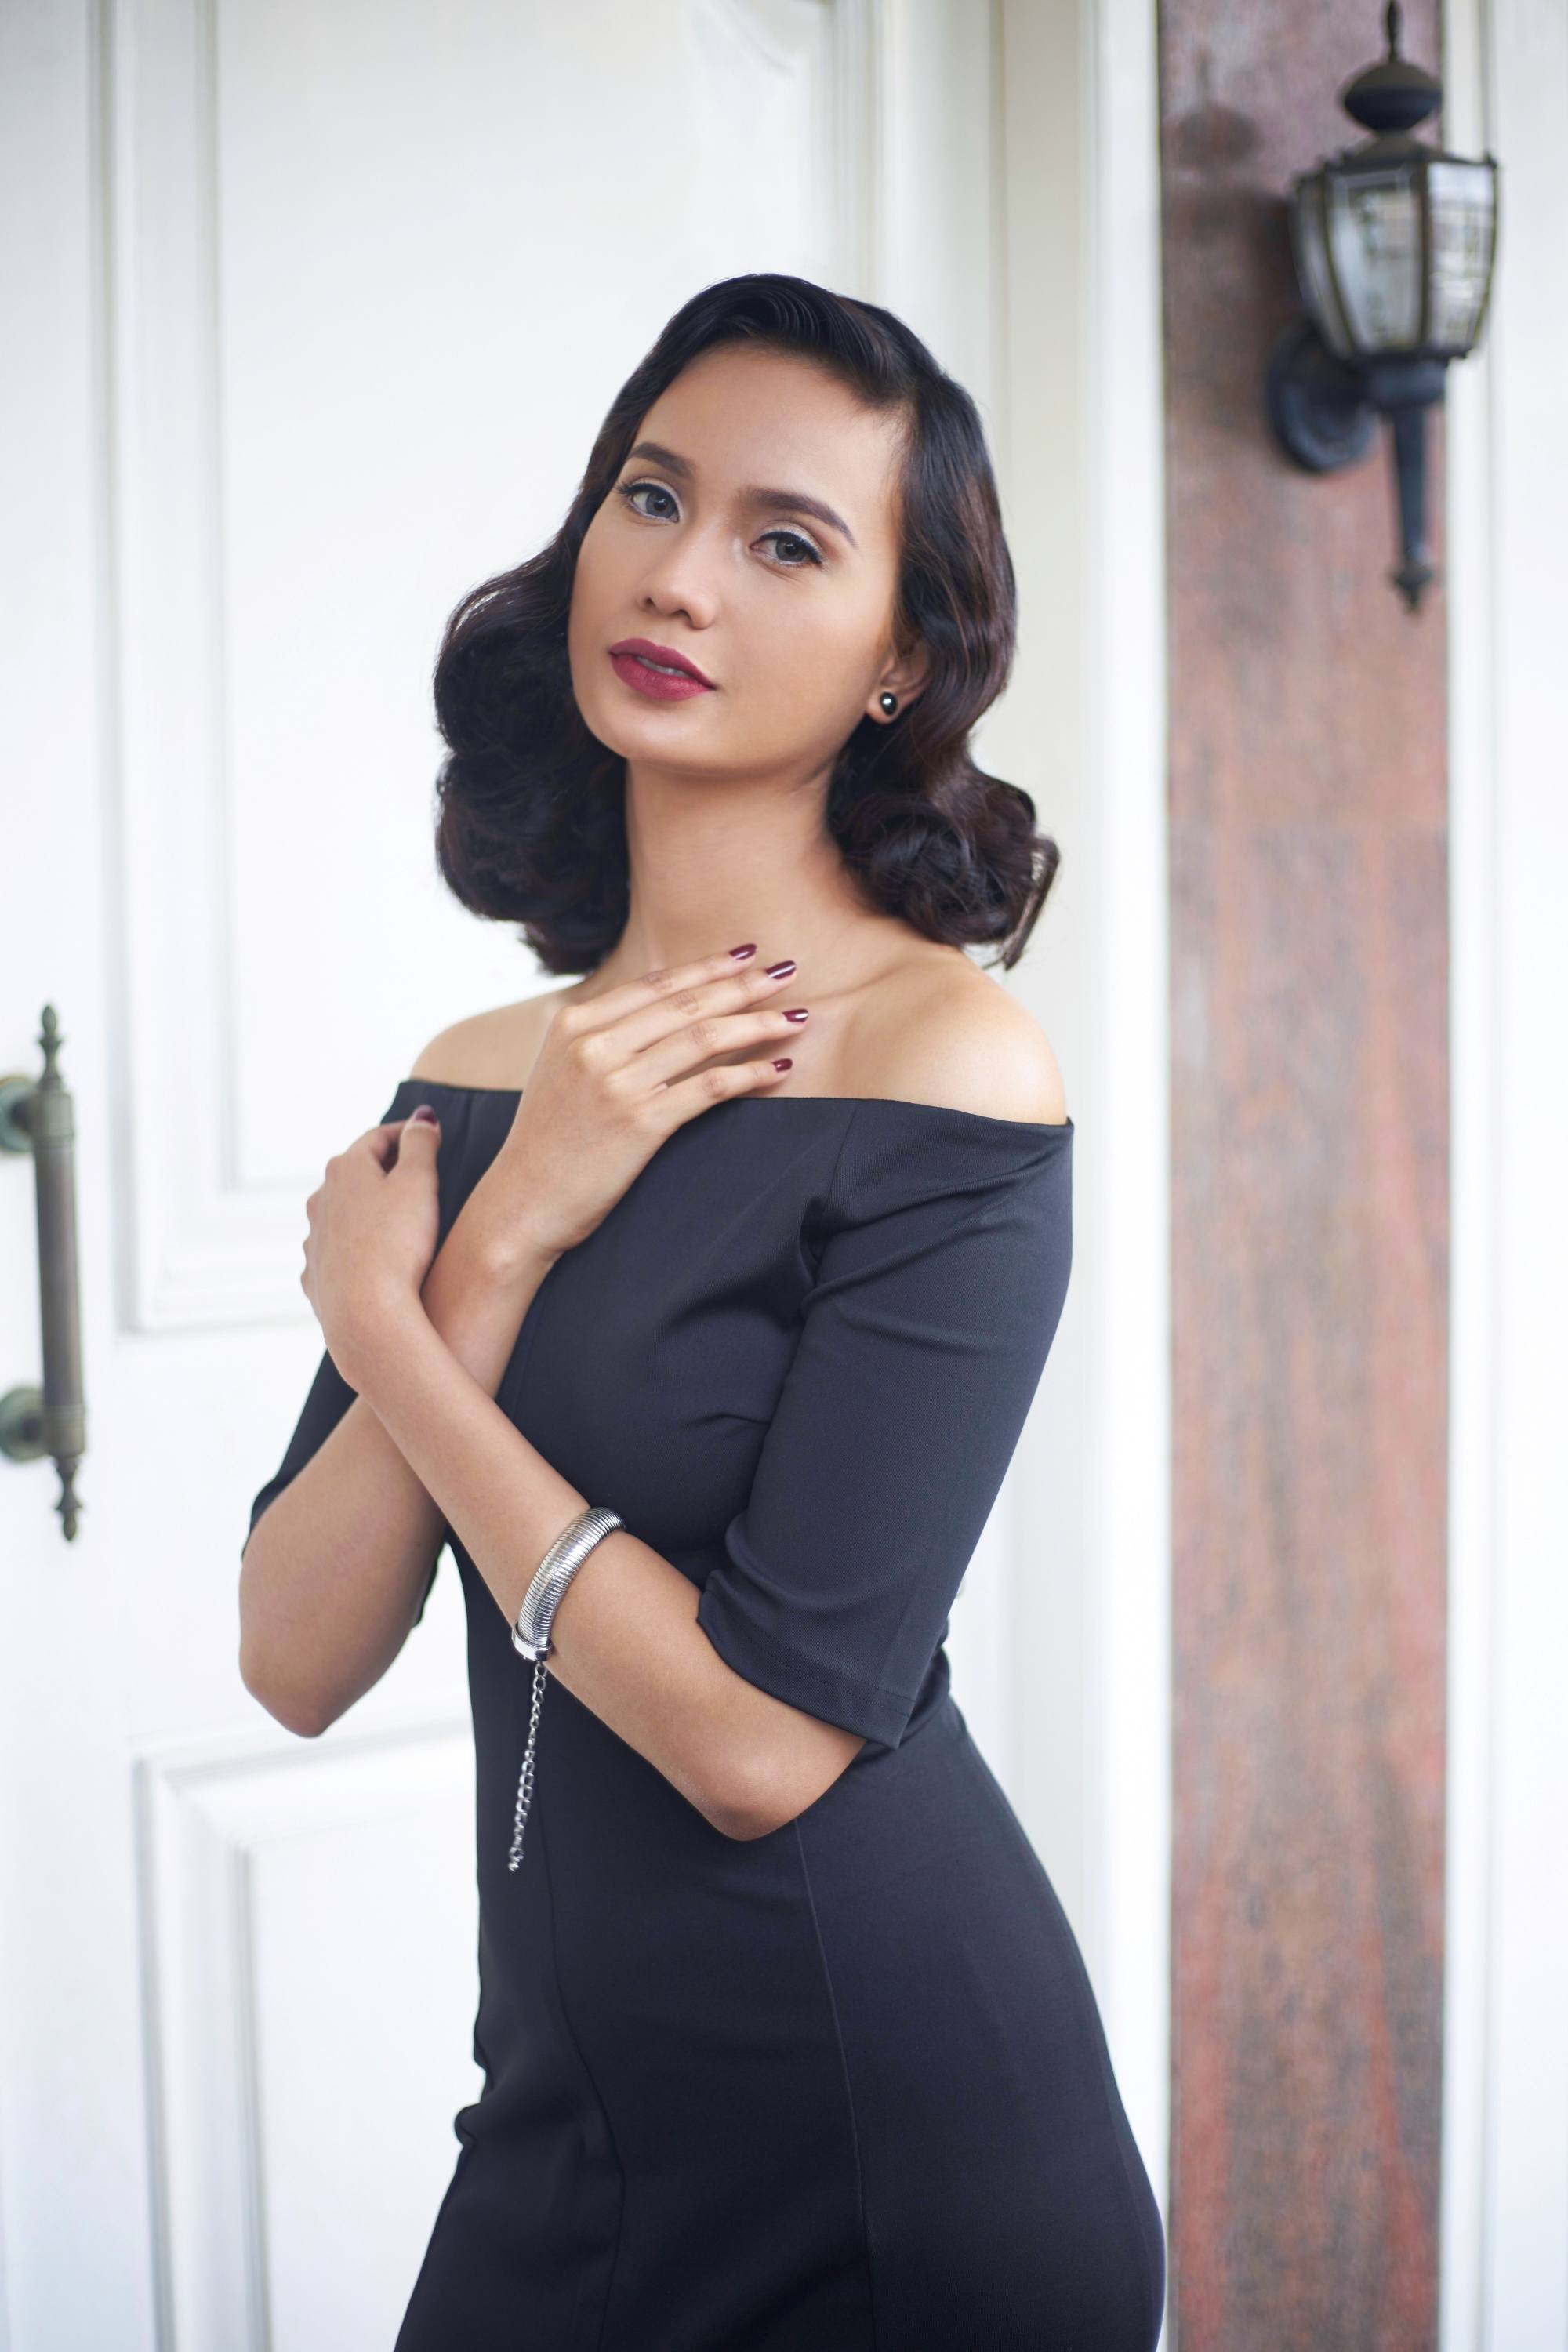 Asian woman with dark shoulder-length curly hair wearing an off-shoulder dress